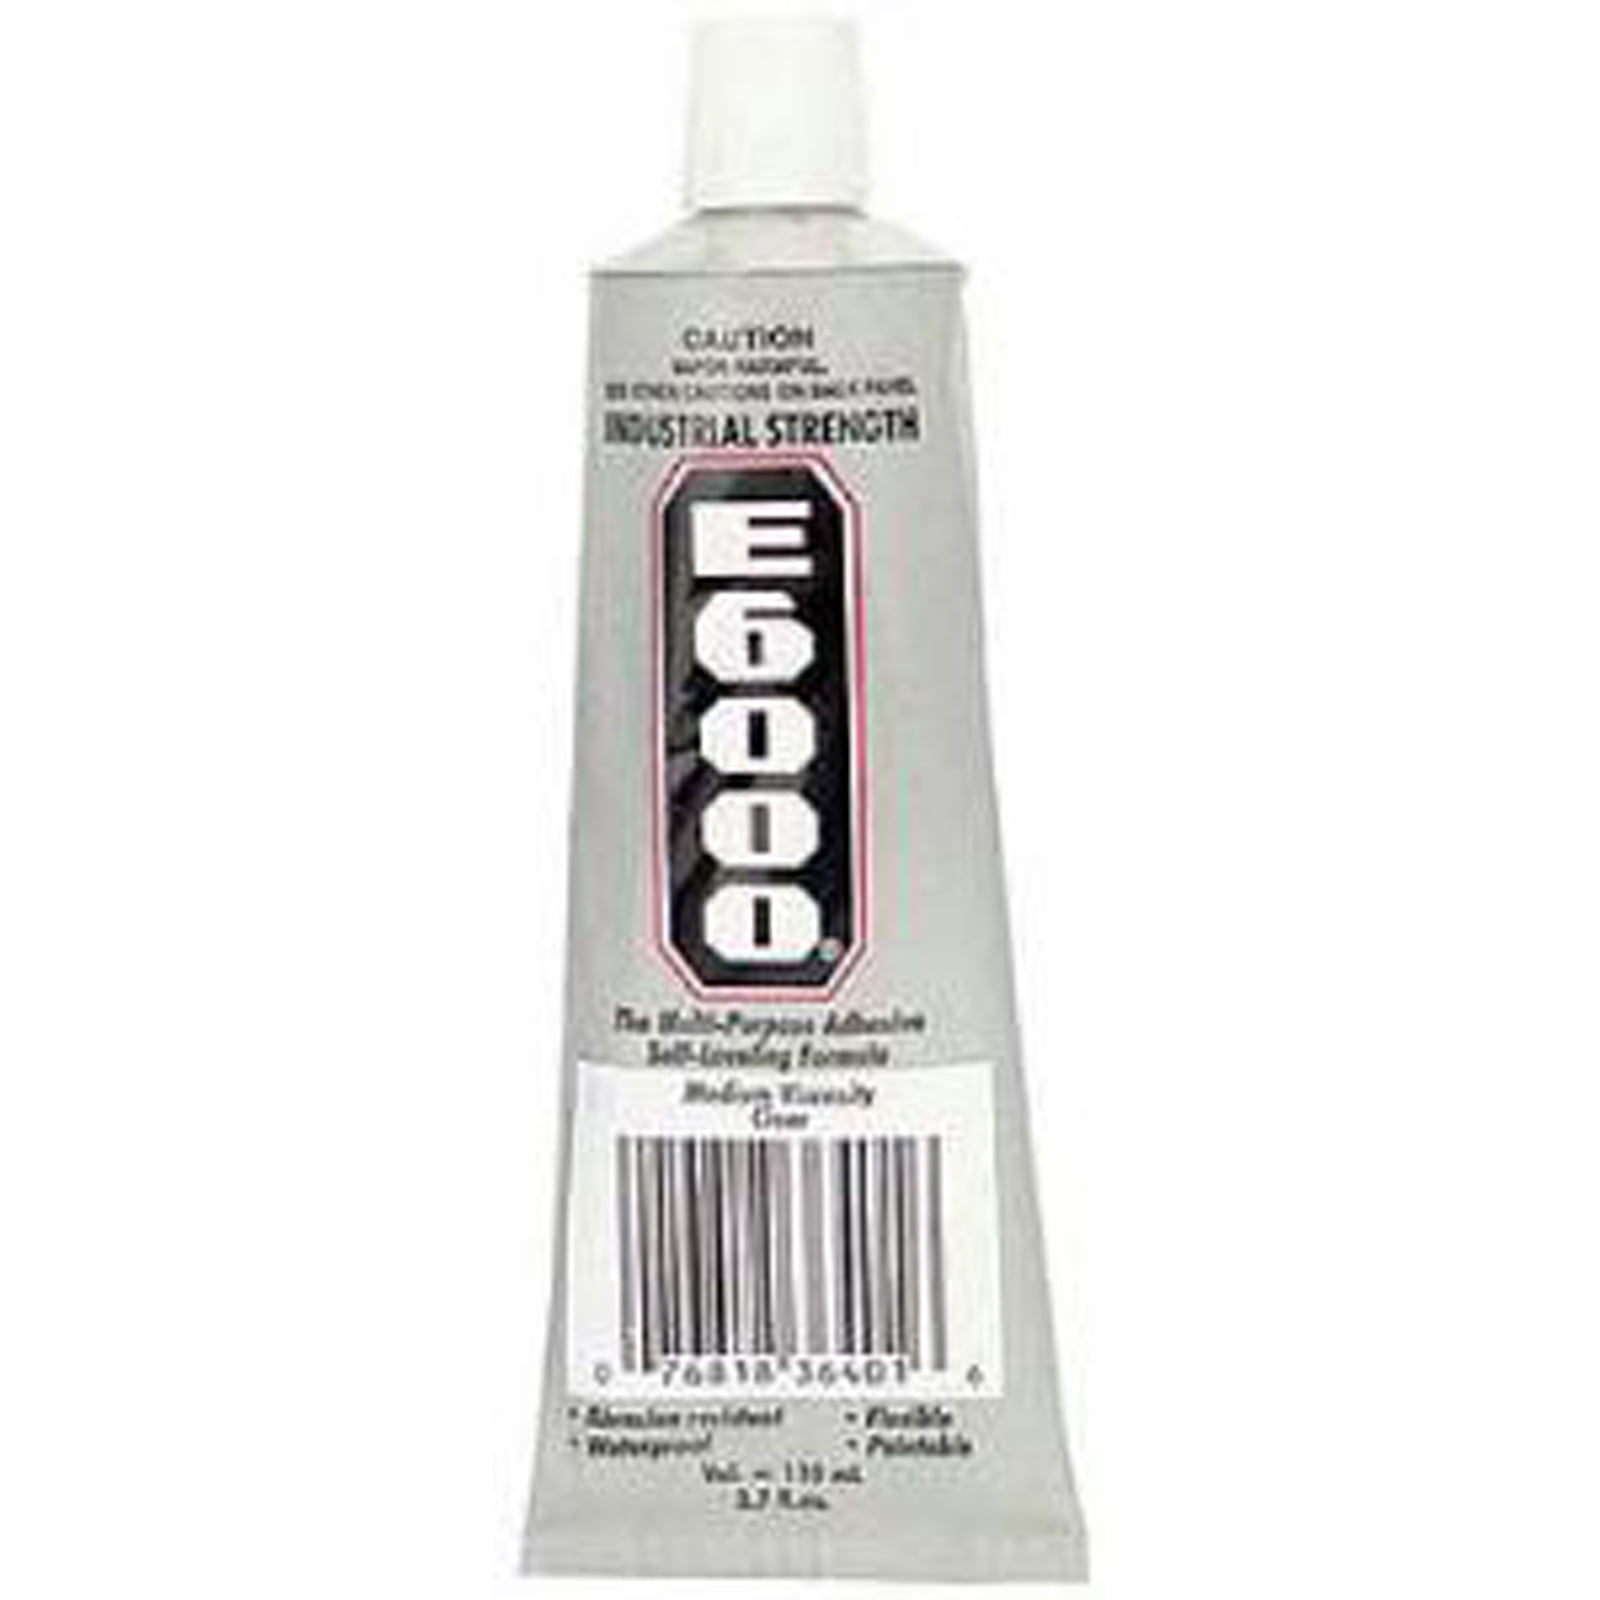 Strong adhesive glue for sticking stones,patches,art n craft works-pack of  one piece of E-6000 glue(60ml)